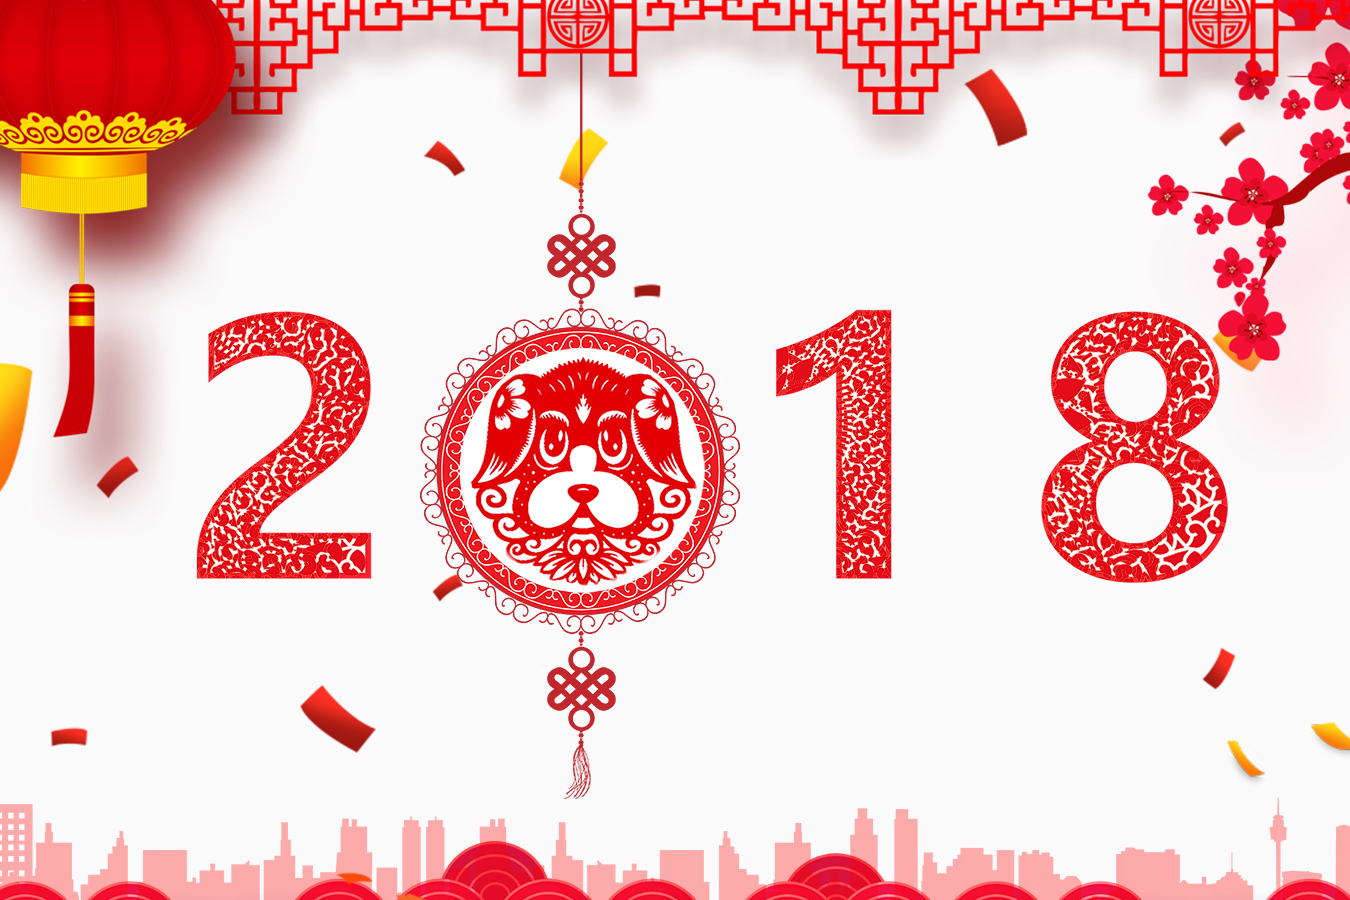 Inform of new-year holiday 2018